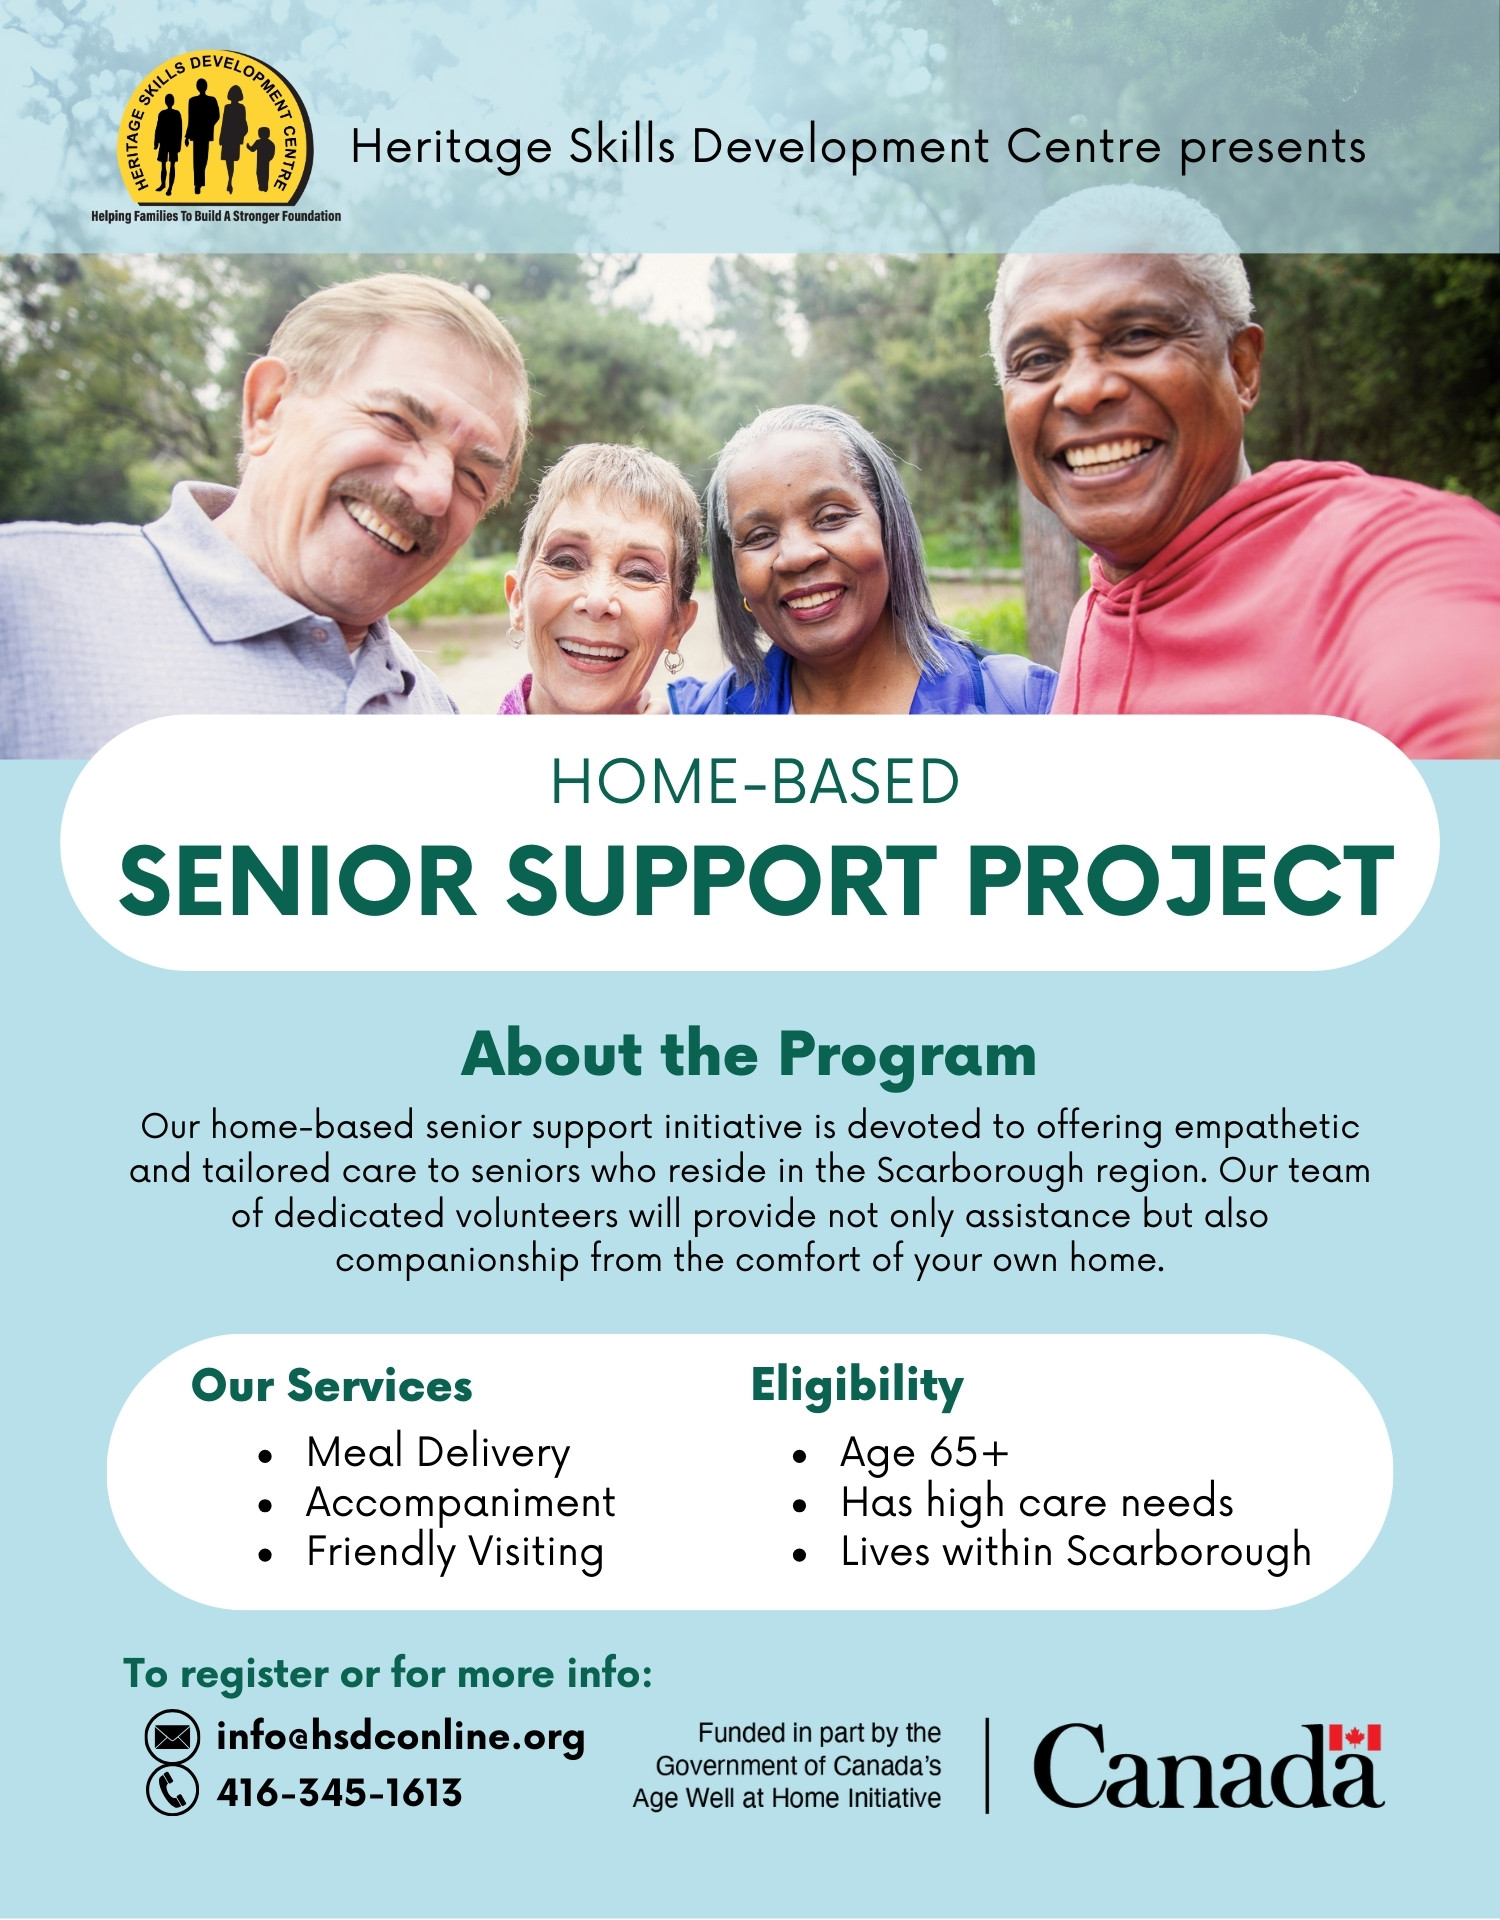 Free Senior in Home Support Program- Meals, Friendly Visiting in Scarborough, Scarborough, Ontario, Canada